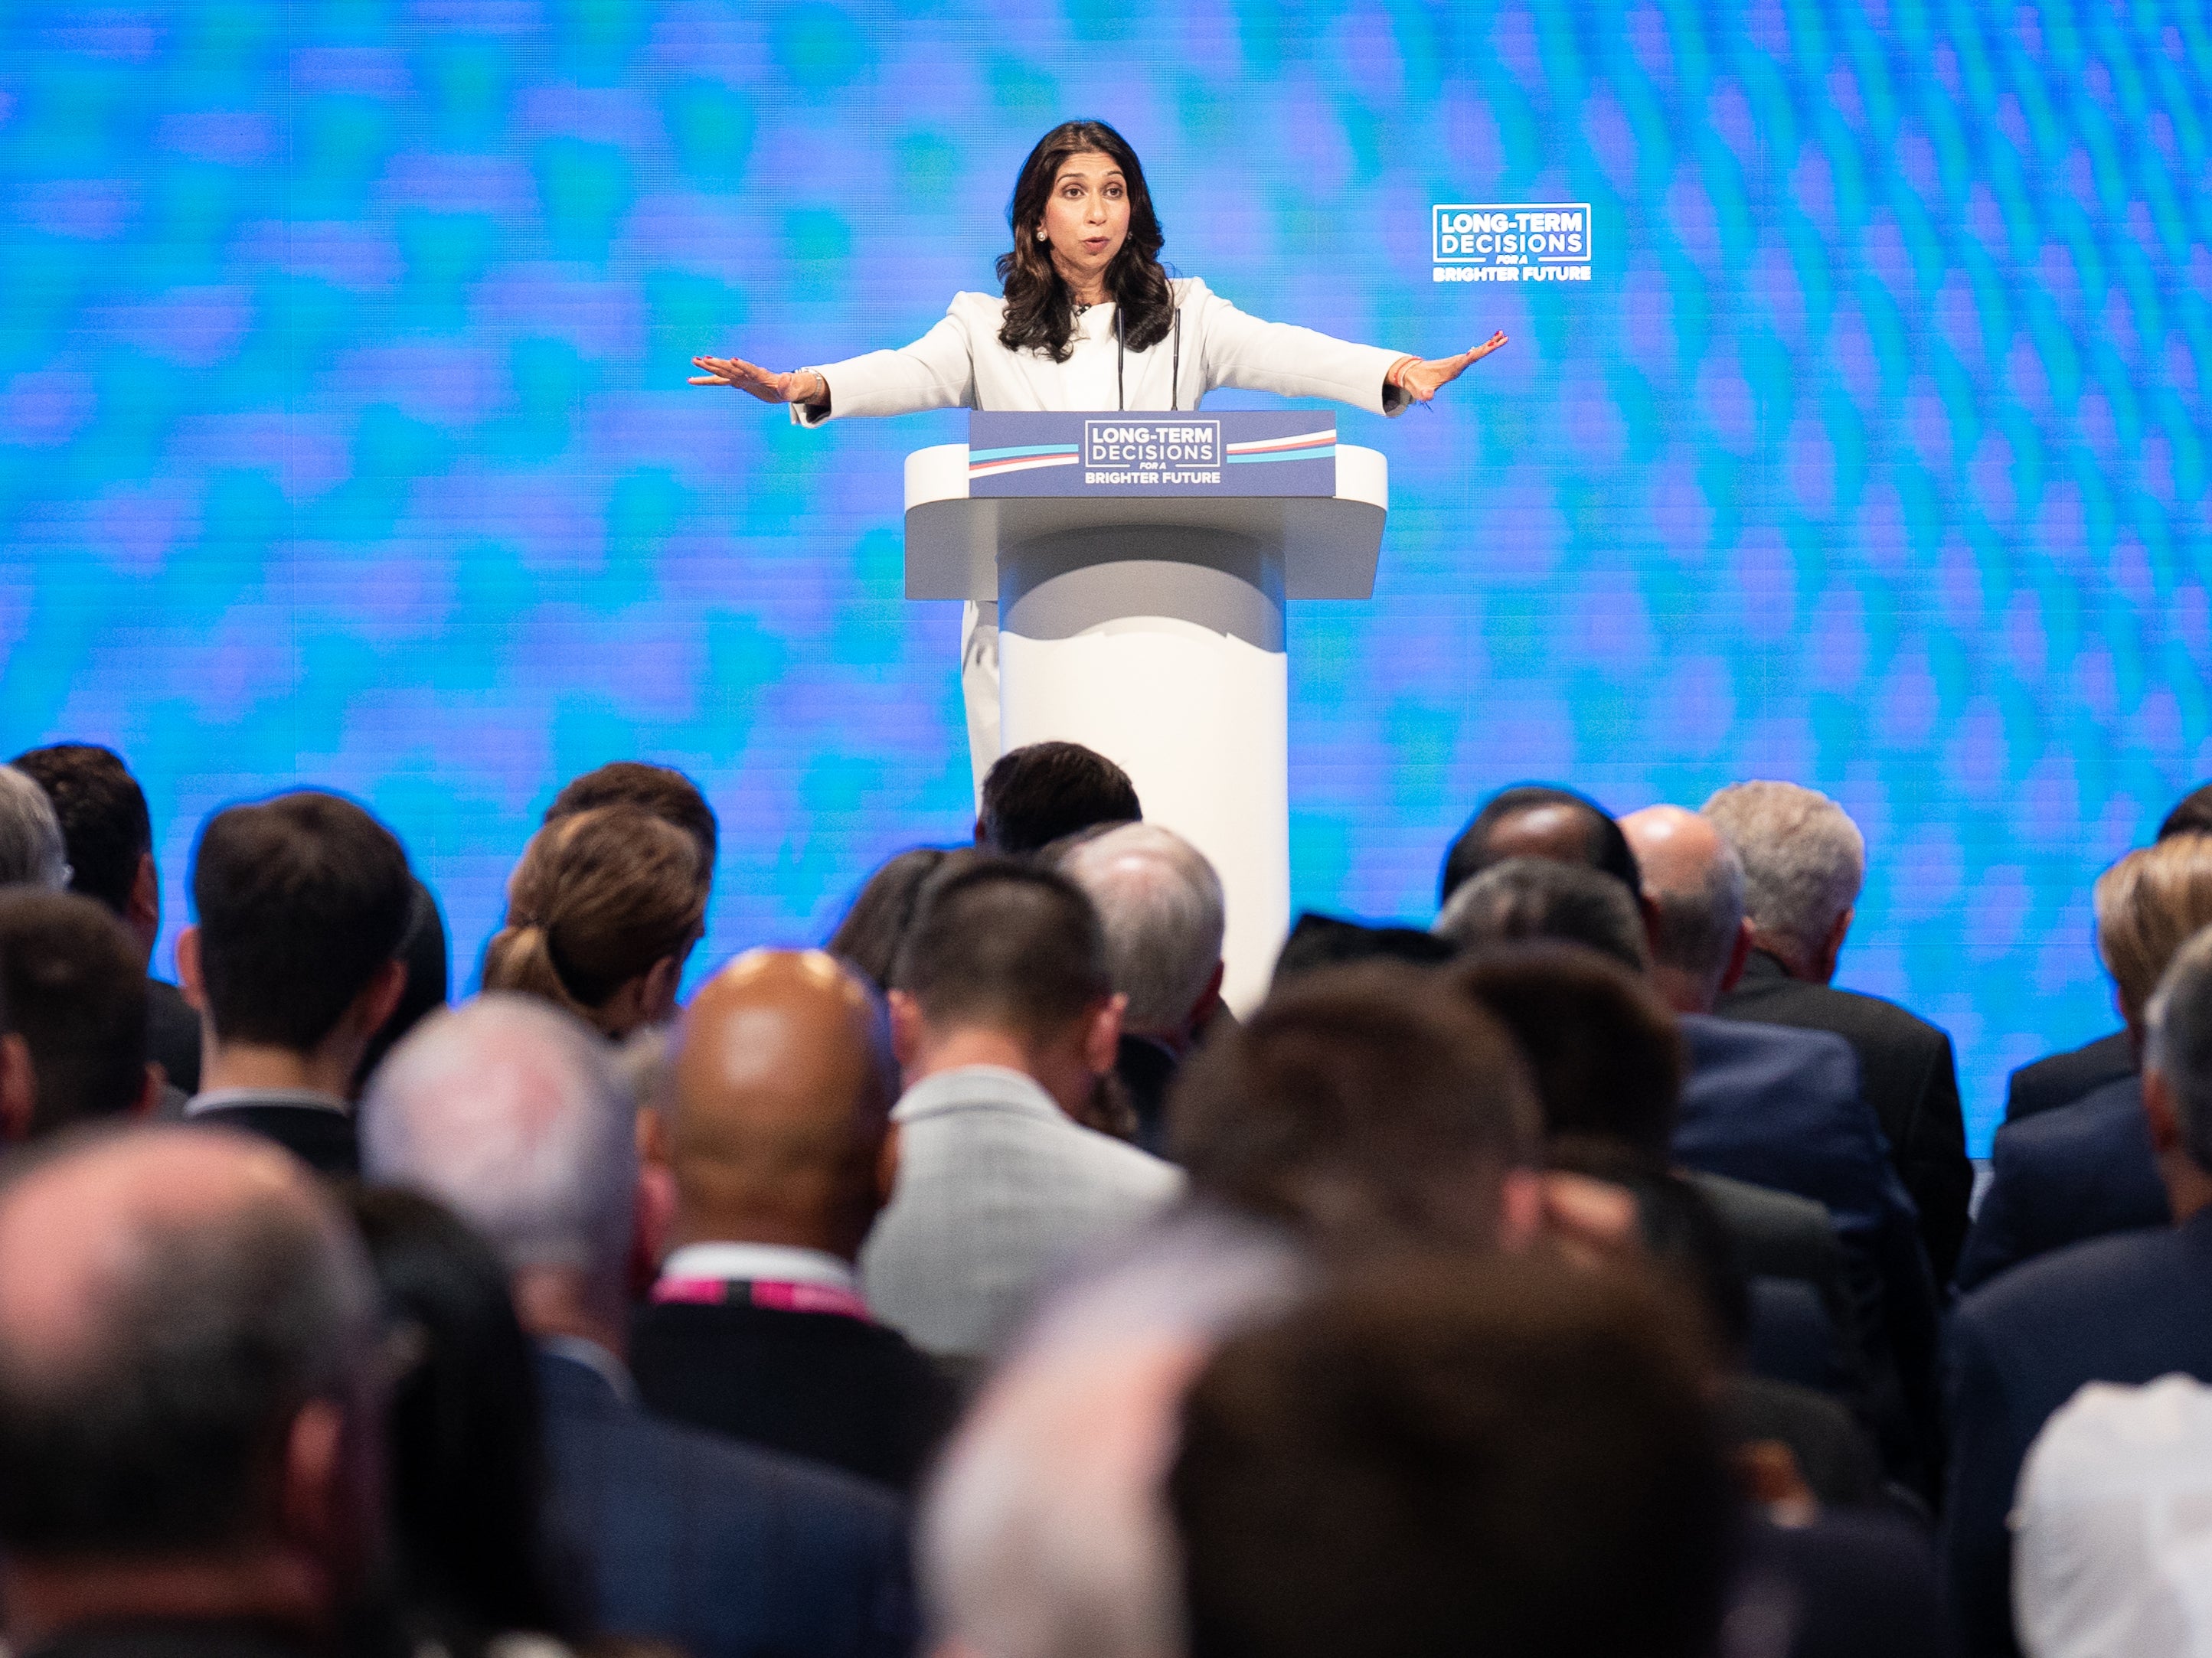 Suella Braverman delivers her keynote speech at Manchester on Tuesday